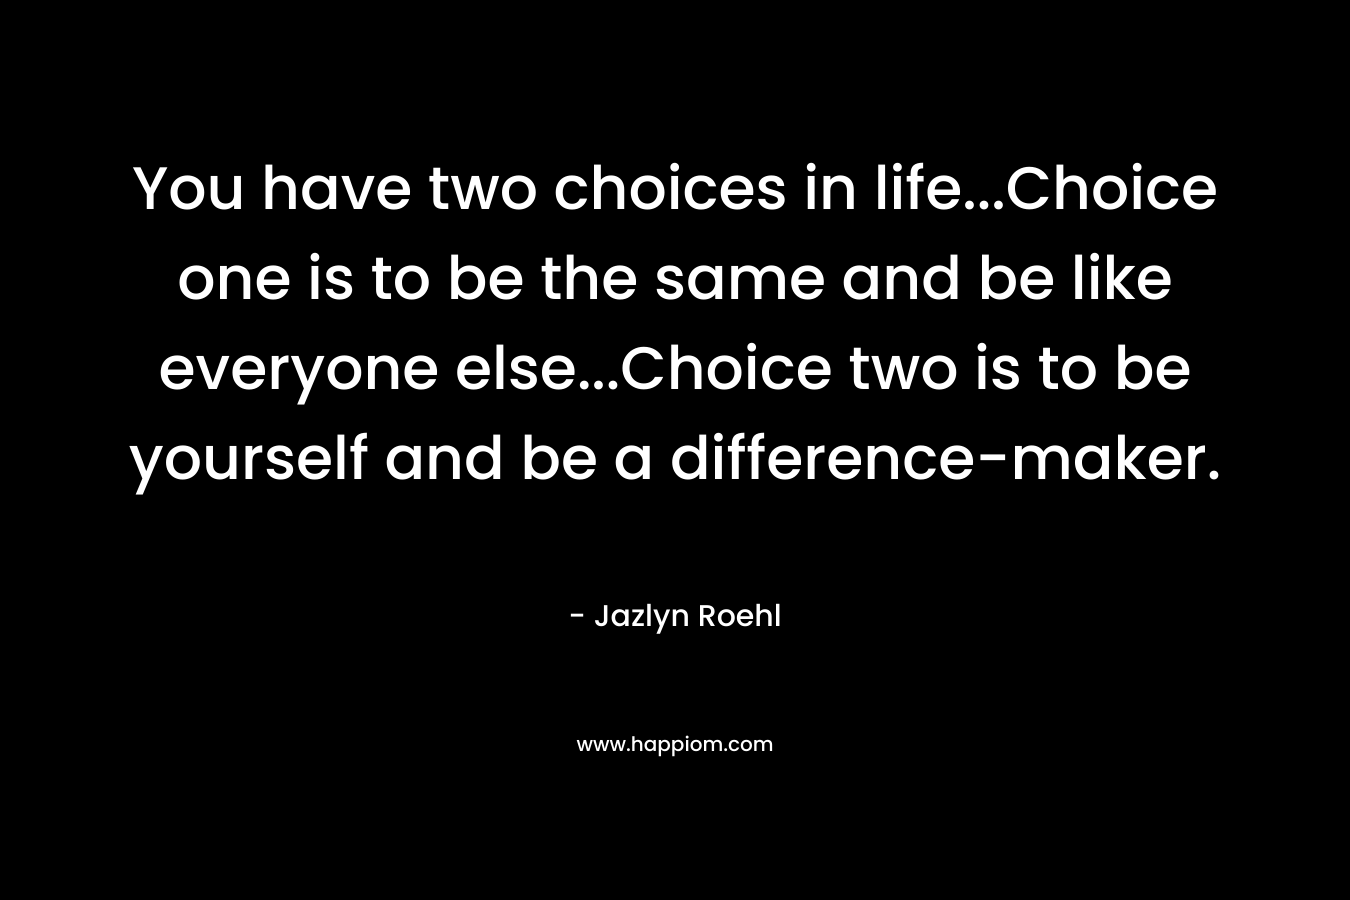 You have two choices in life...Choice one is to be the same and be like everyone else...Choice two is to be yourself and be a difference-maker.